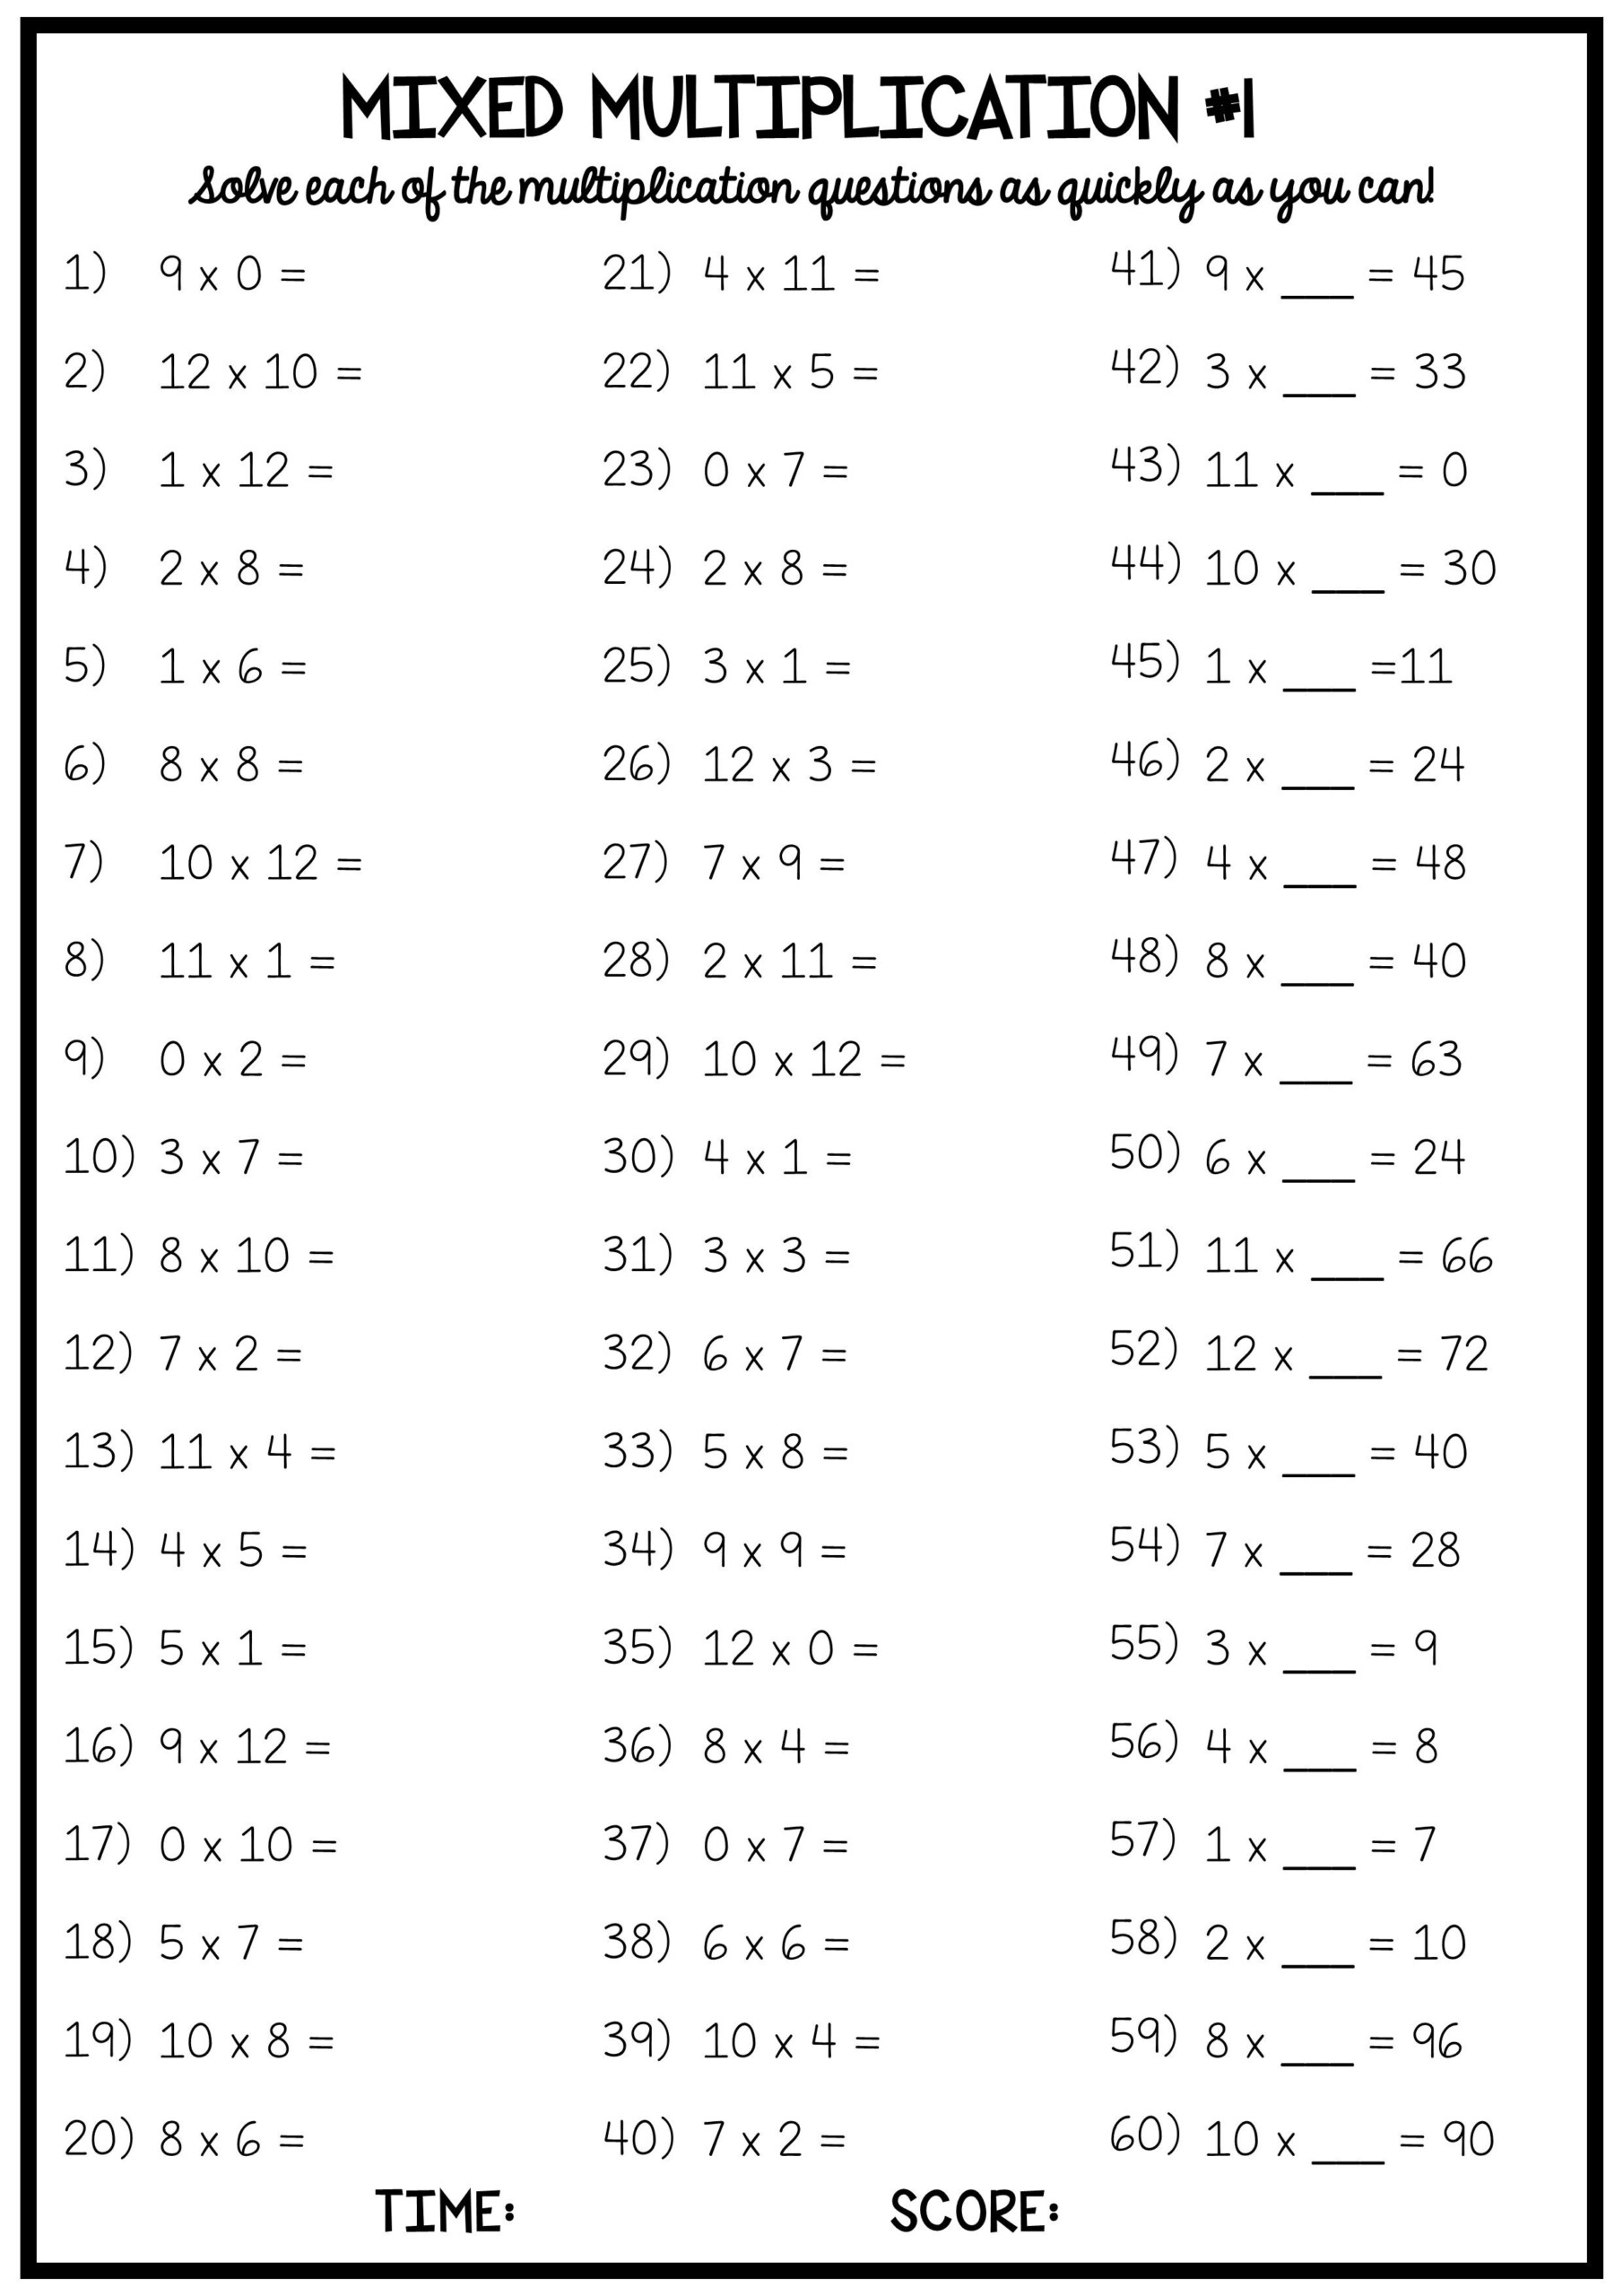 multiplication-chart-missing-numbers-printablemultiplicationcom-missing-number-multiplication